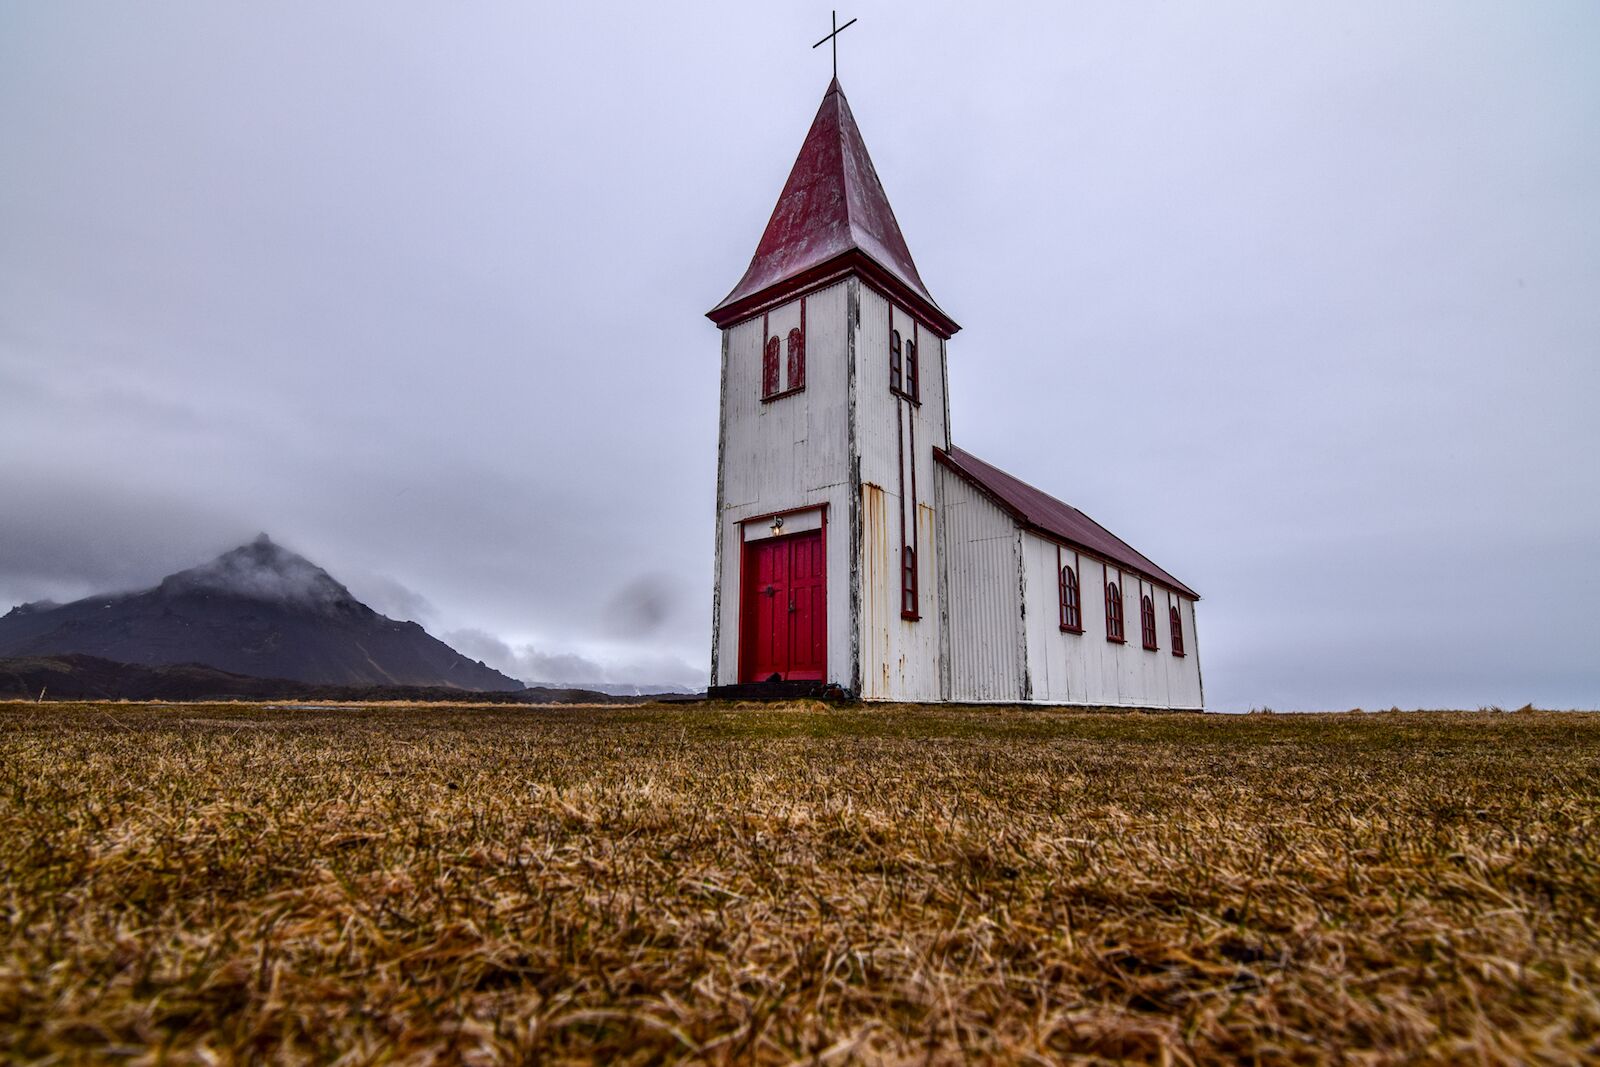 landsscape photography tips shoot from an angle church